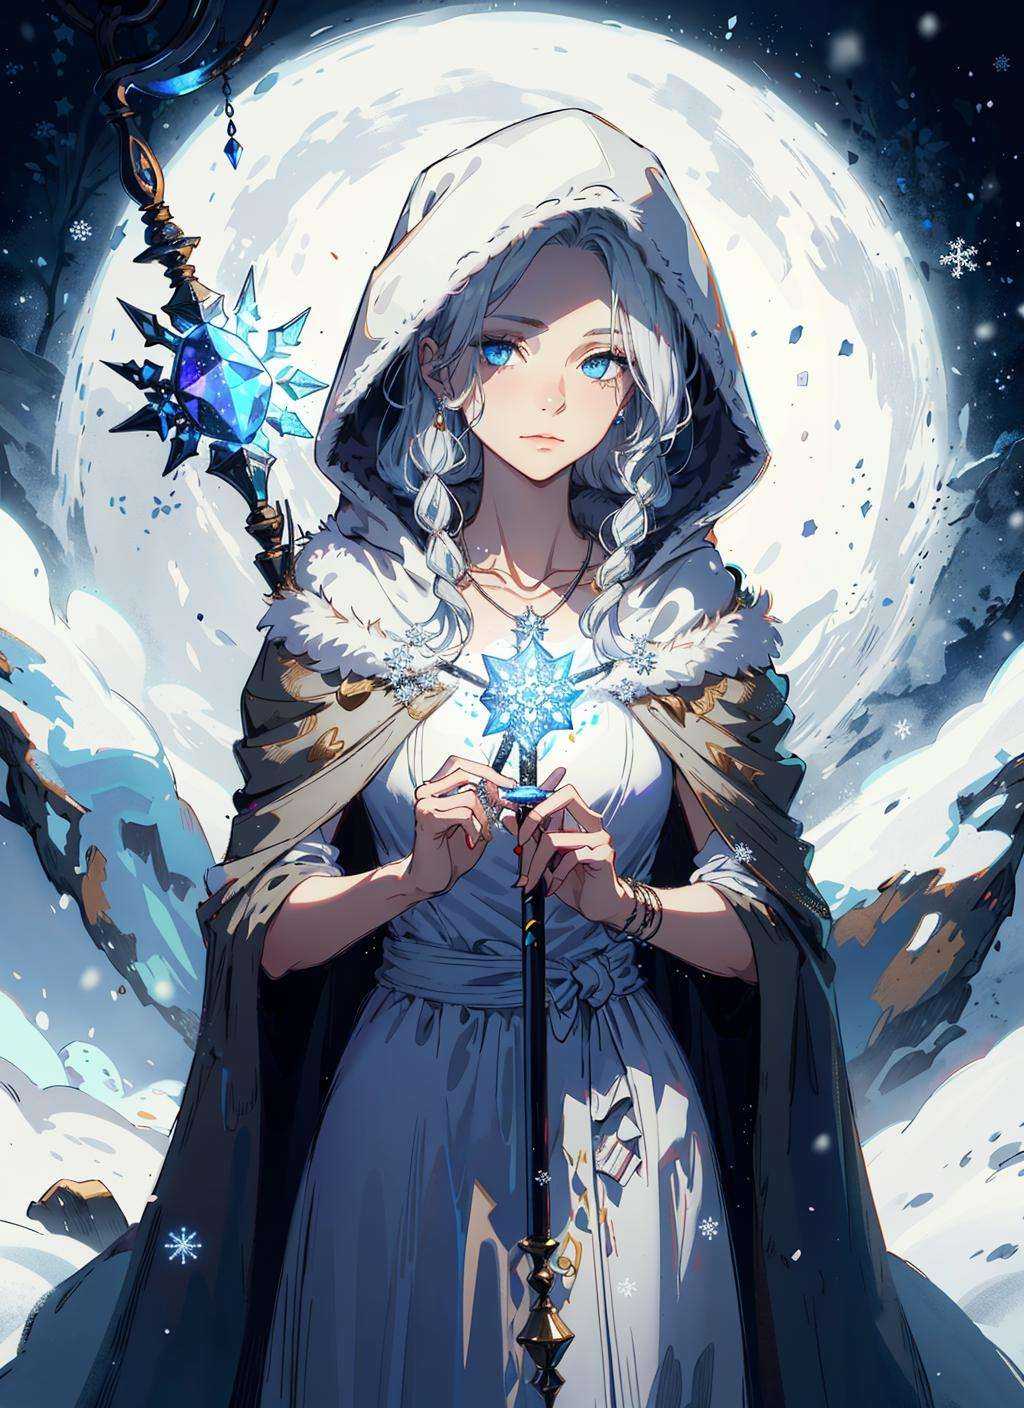 Jani is a witch who lives in a snowy region of Elden Ring. She has long silver hair and blue eyes that glow with magic. She wears a white dress with fur trim and a hooded cloak that covers her shoulders. She also wears a silver necklace with a pendant shaped like a snowflake. She carries a staff that can summon wolves and cast ice spells.